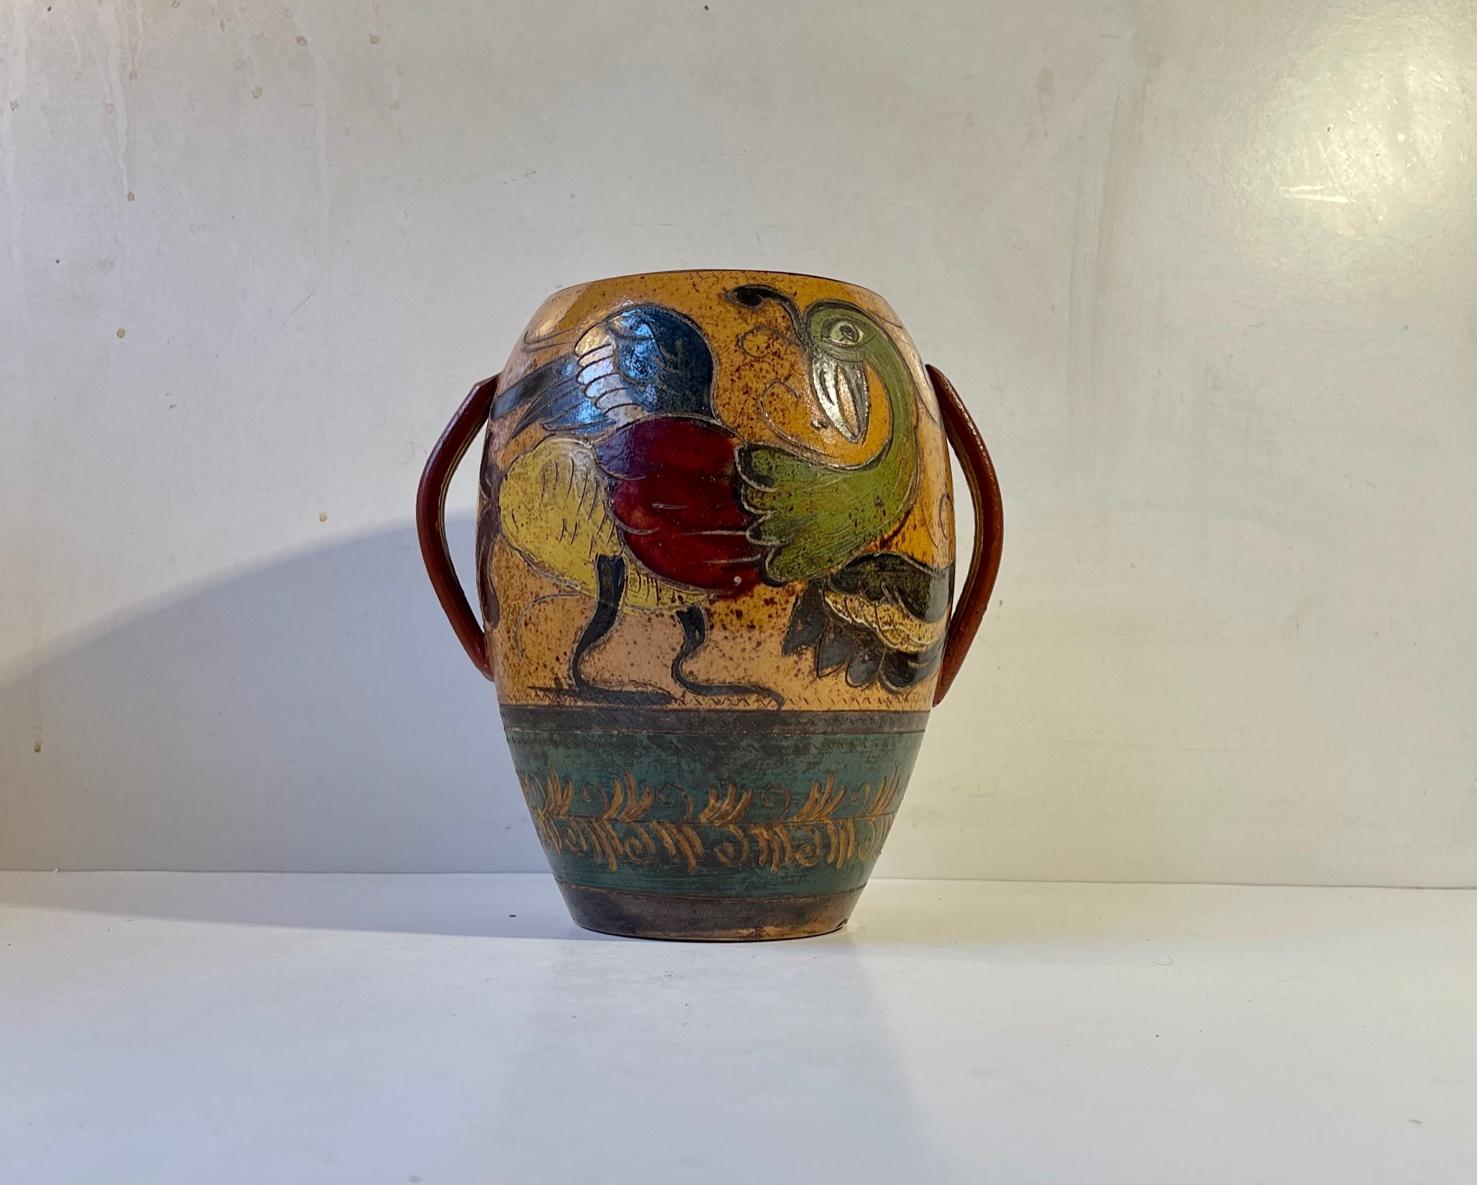 Glazed Antique Italian Terracotta Urn with Roosters in Majolica, 18th/19th Century For Sale